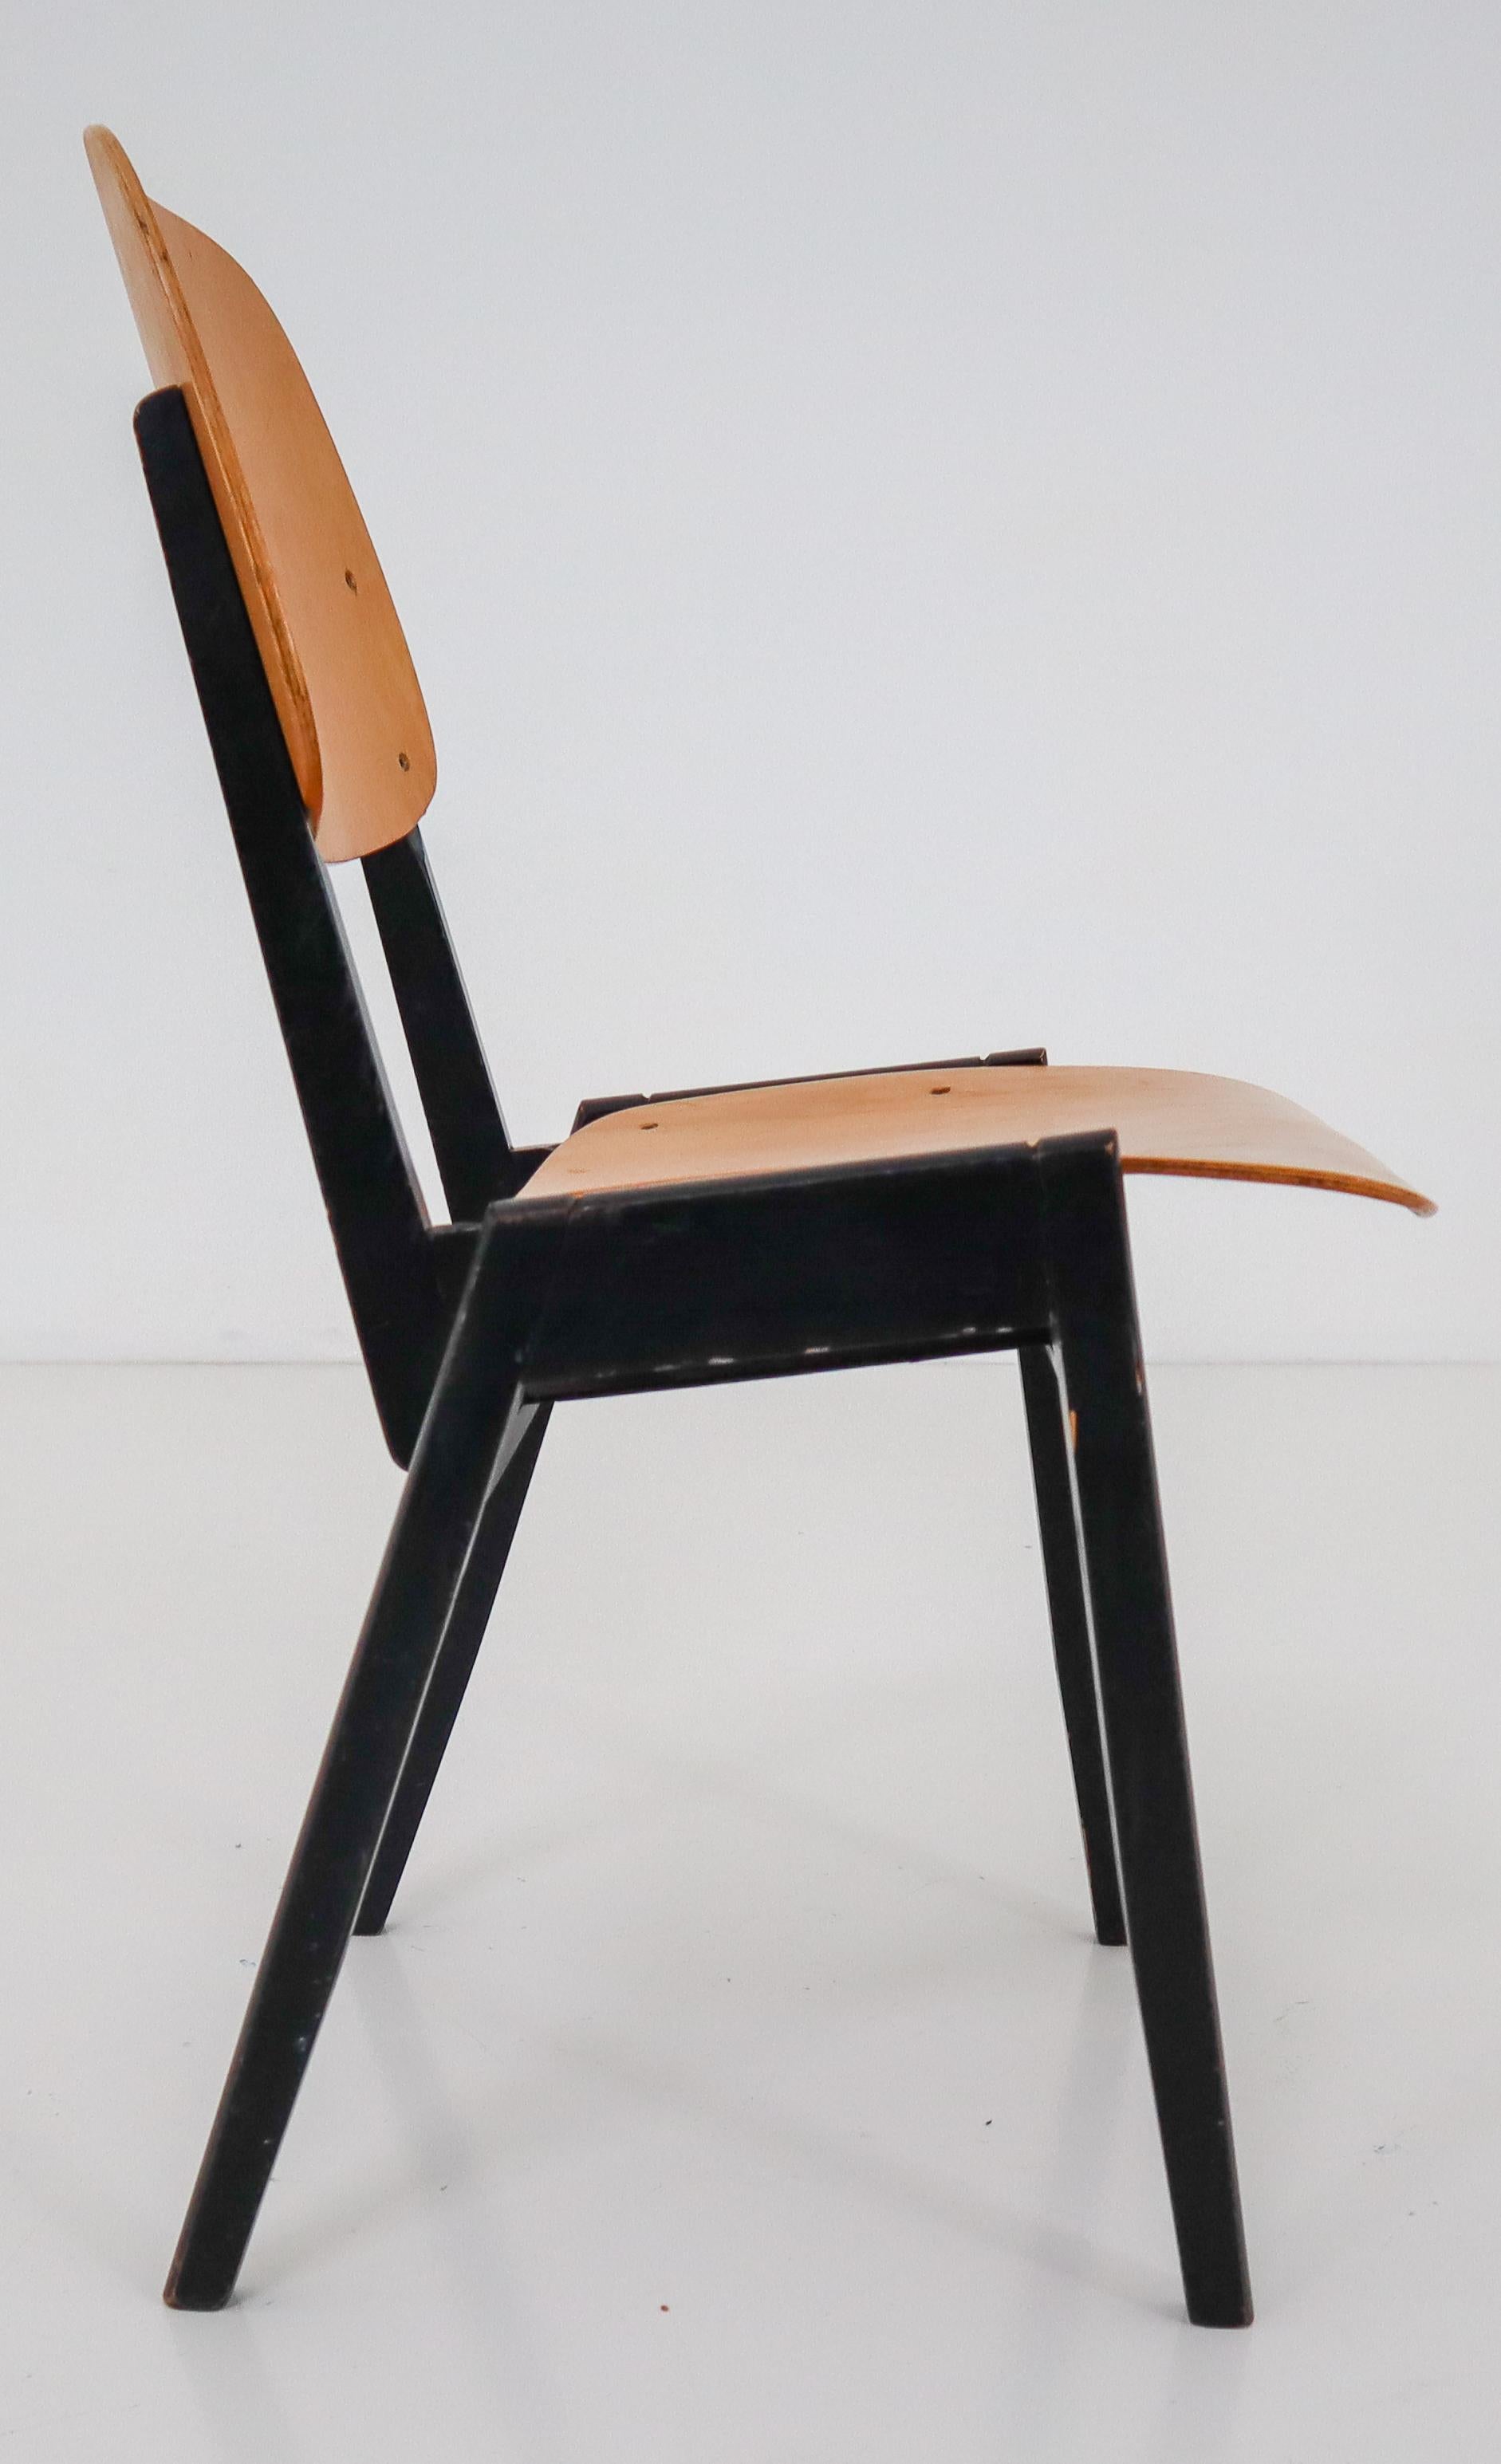 Beech 50 Bicolored Stacking Chairs Designed in the Manner of Roland Rainer, 1960s